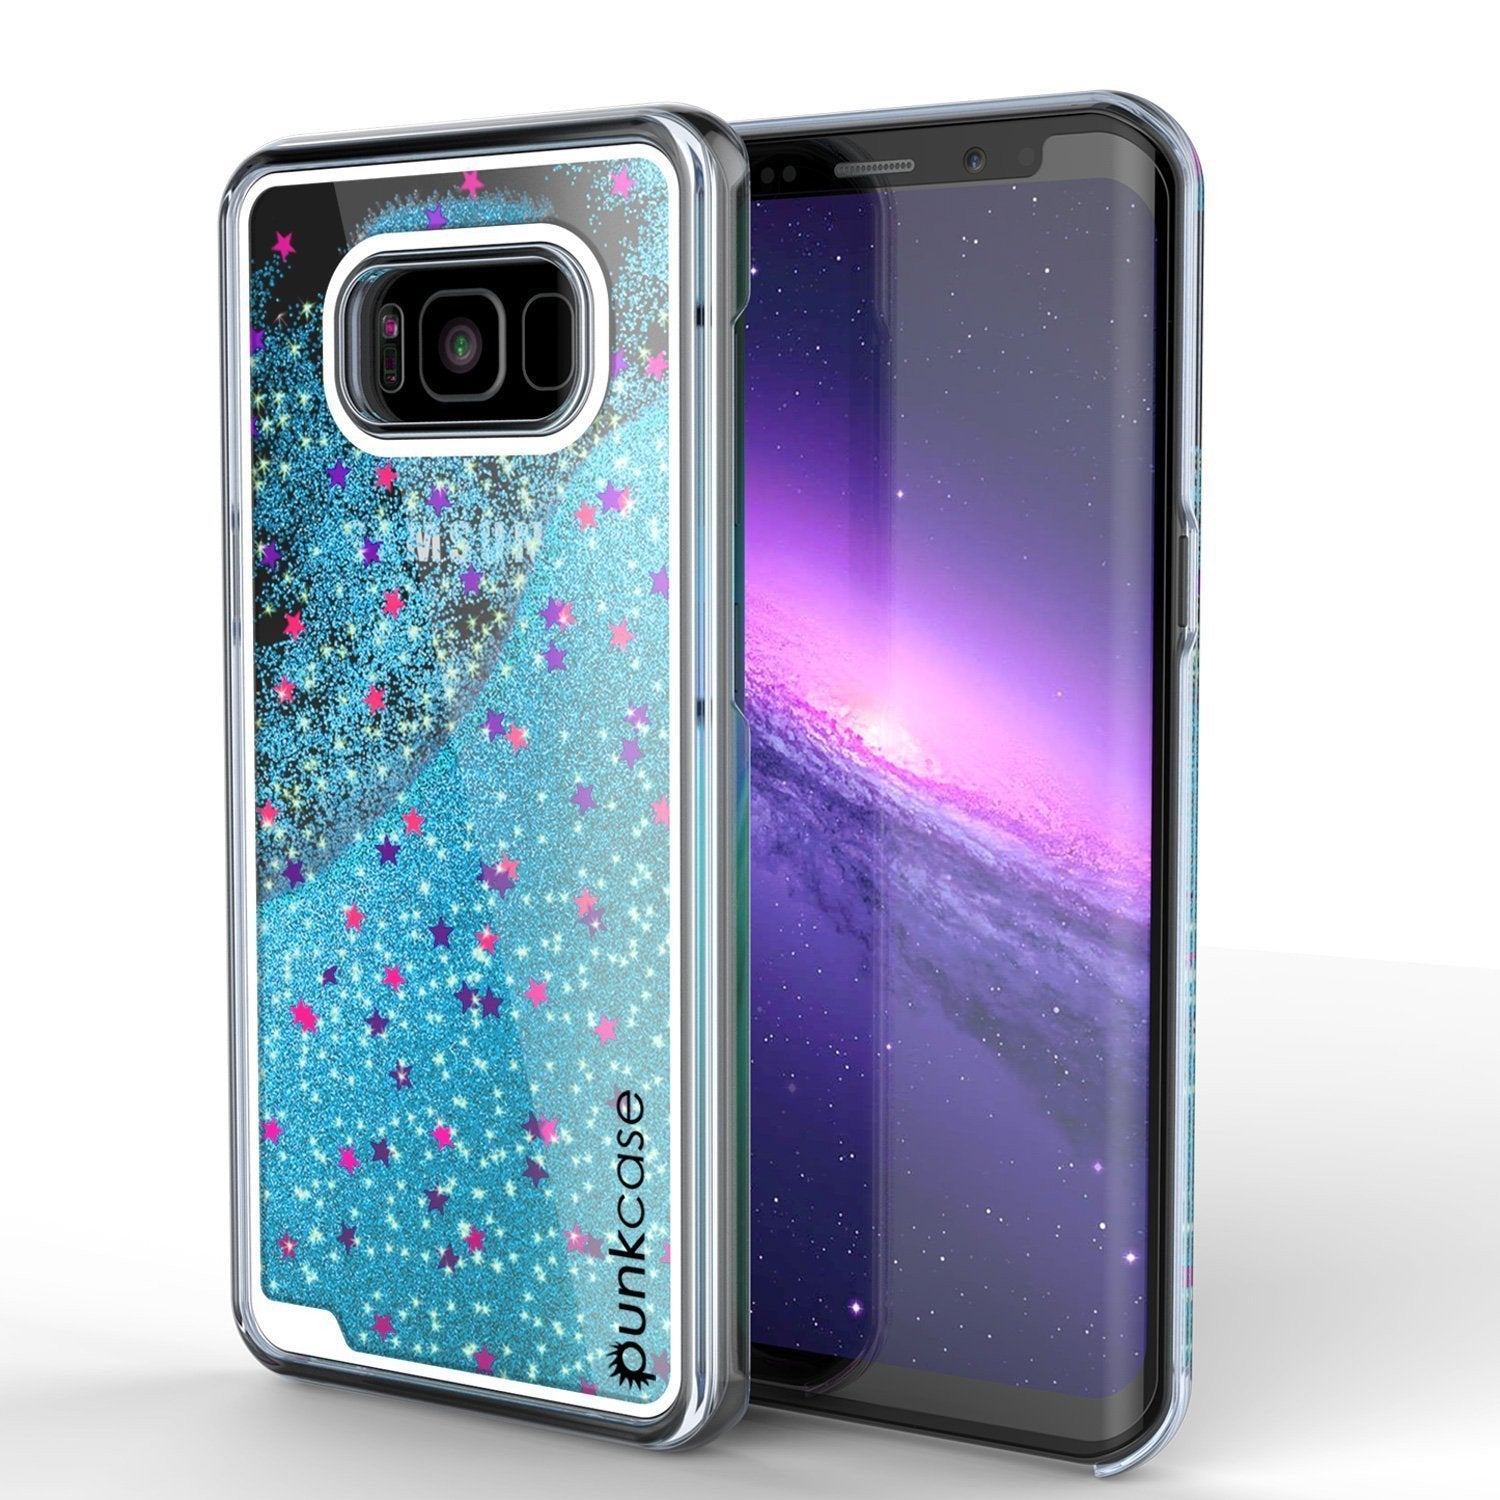 Galaxy S8 Case, Punkcase [Liquid Series] Protective Dual Layer Floating Glitter Cover with lots of Bling & Sparkle + PunkShield Screen Protector for Samsung S8 [Teal]